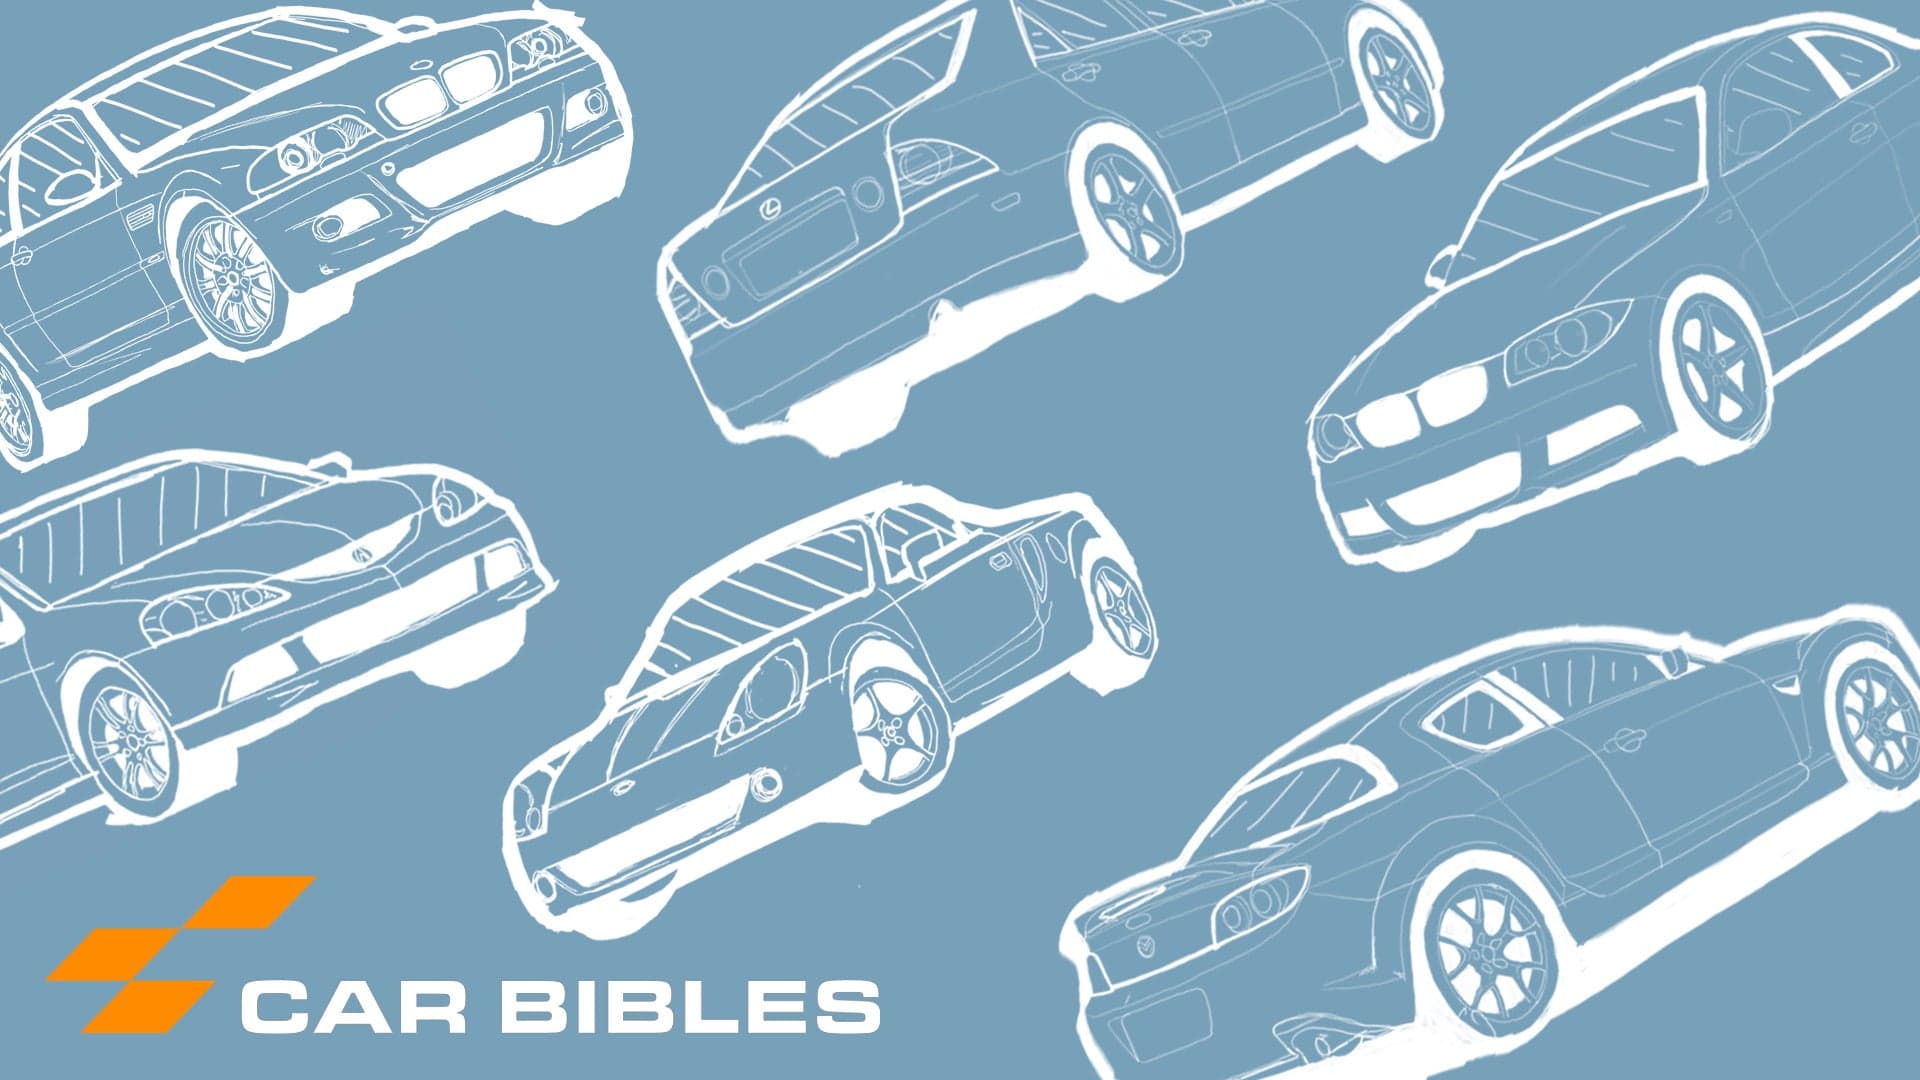 Car Bibles Has Risen With Hot Takes, Cultural Commentary and Essential How-Tos